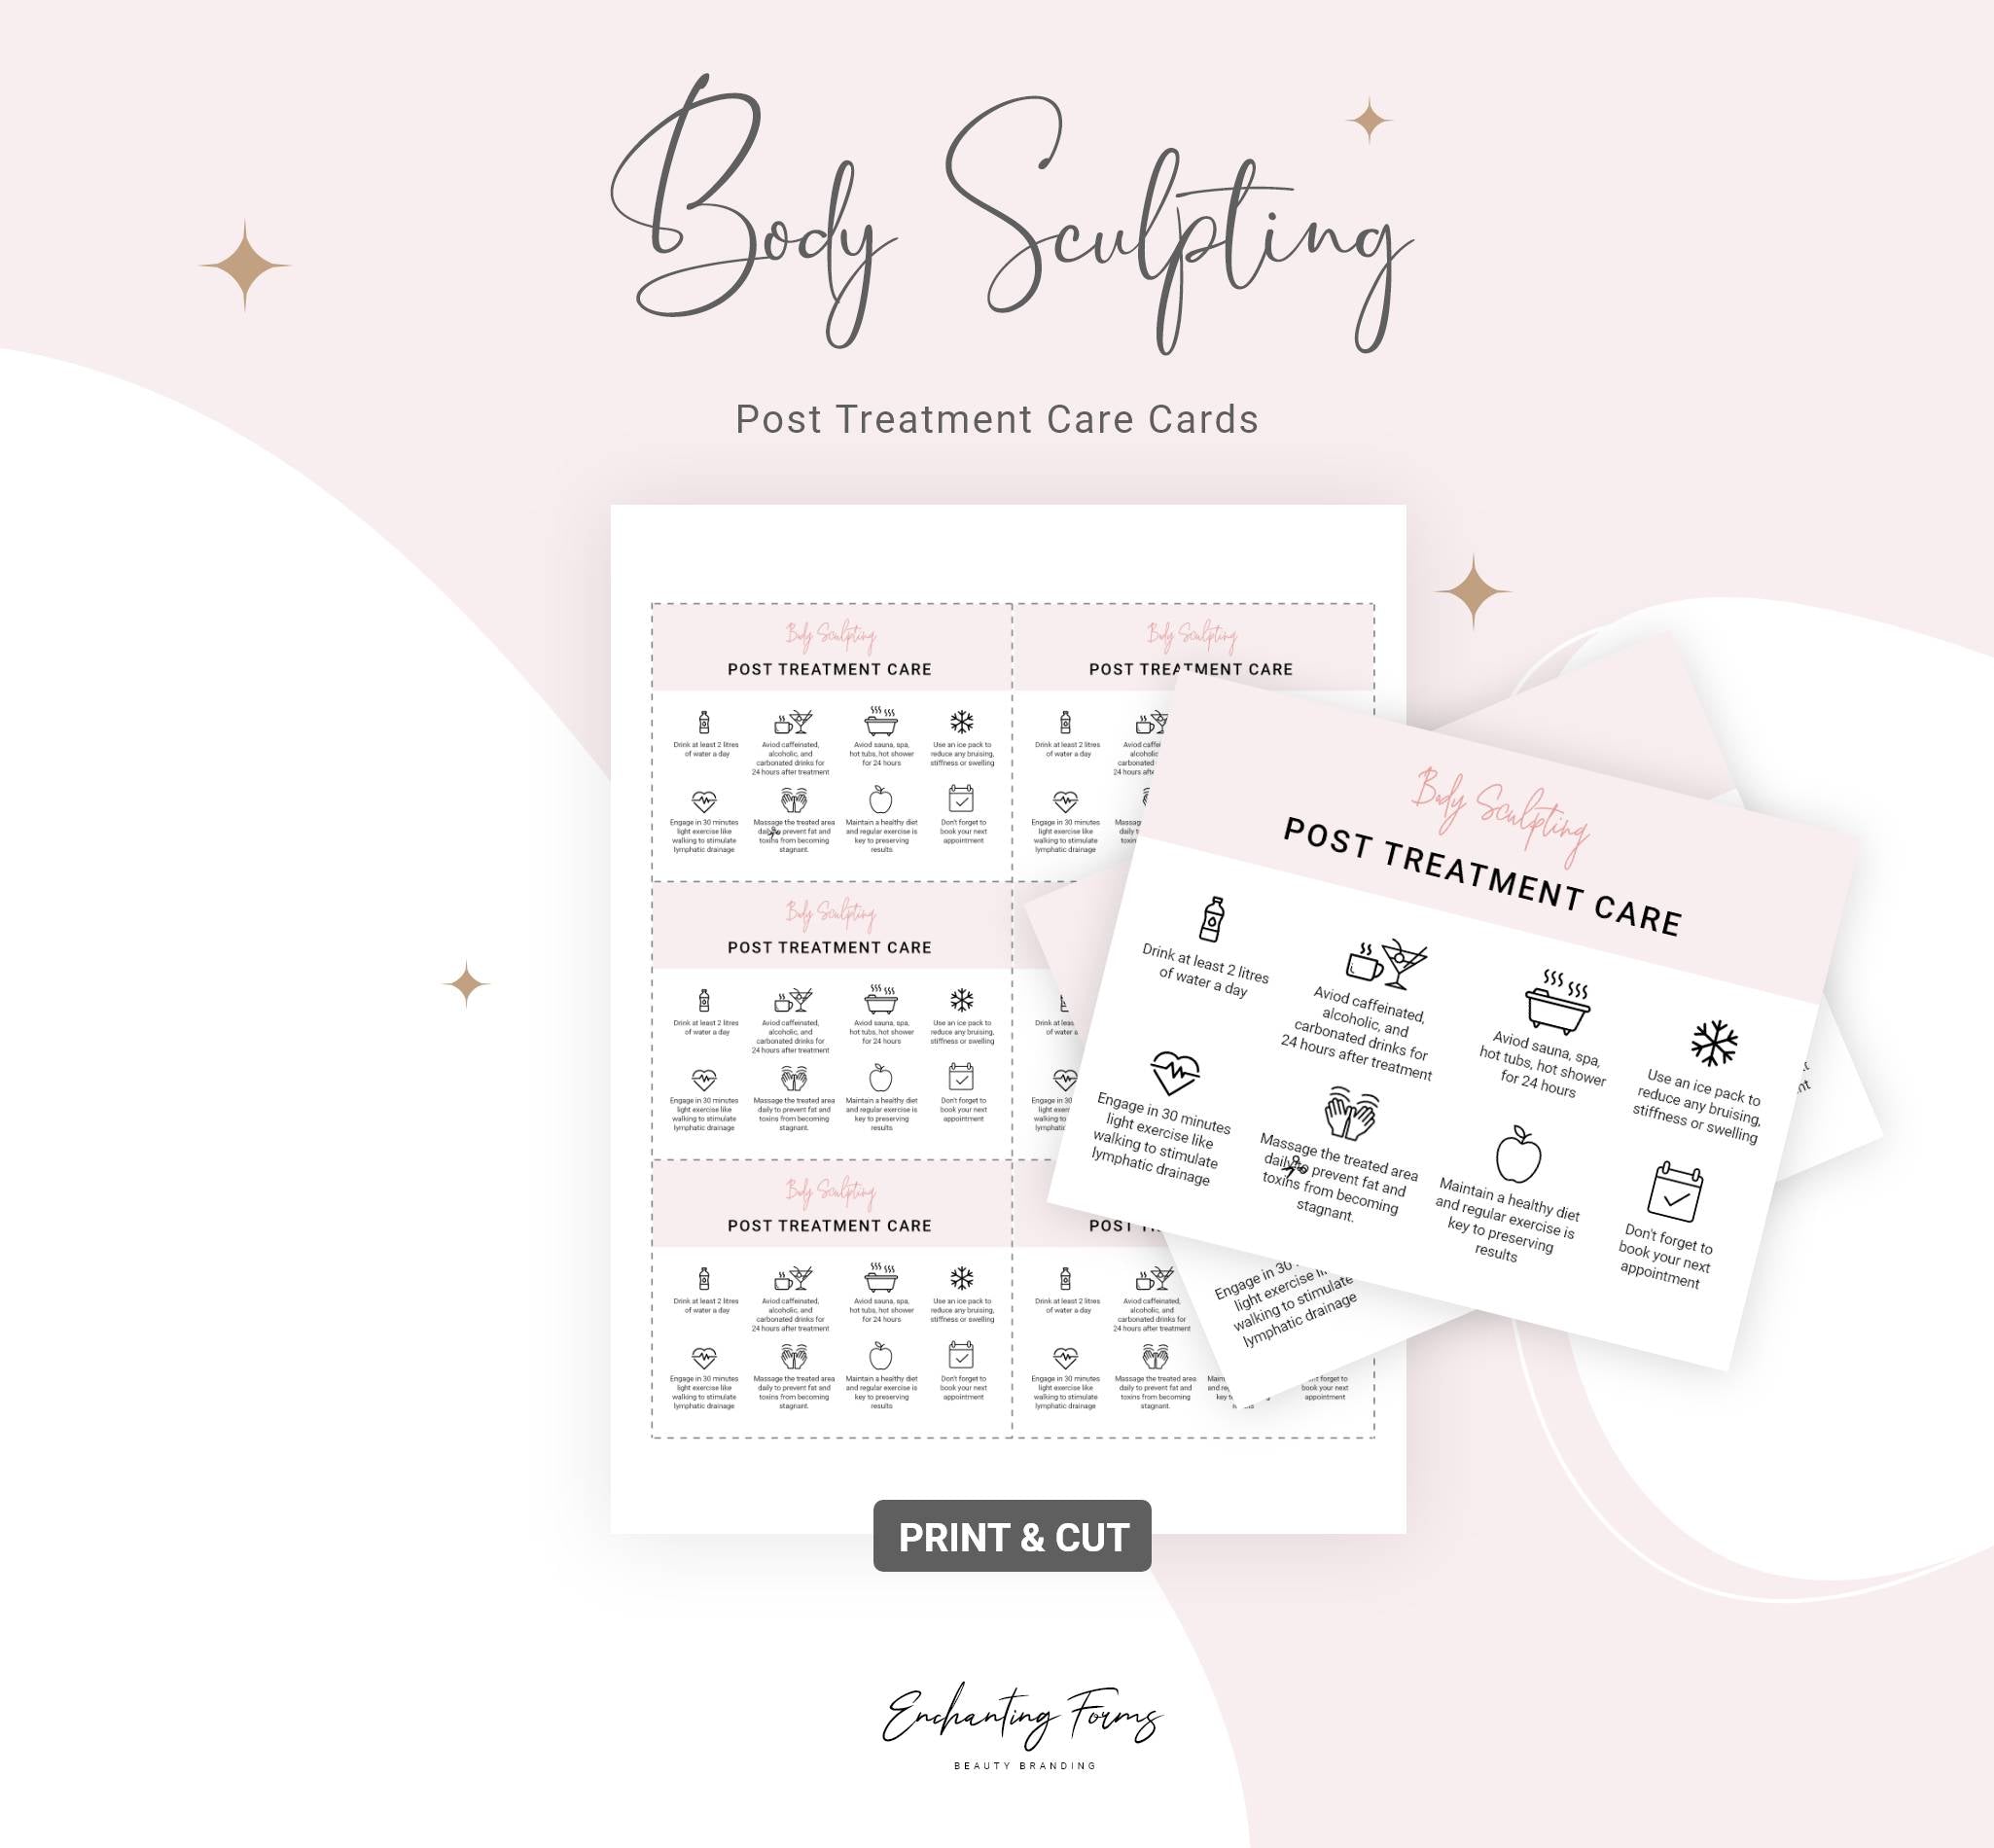 Body Sculpting Post Treatment Care Cards